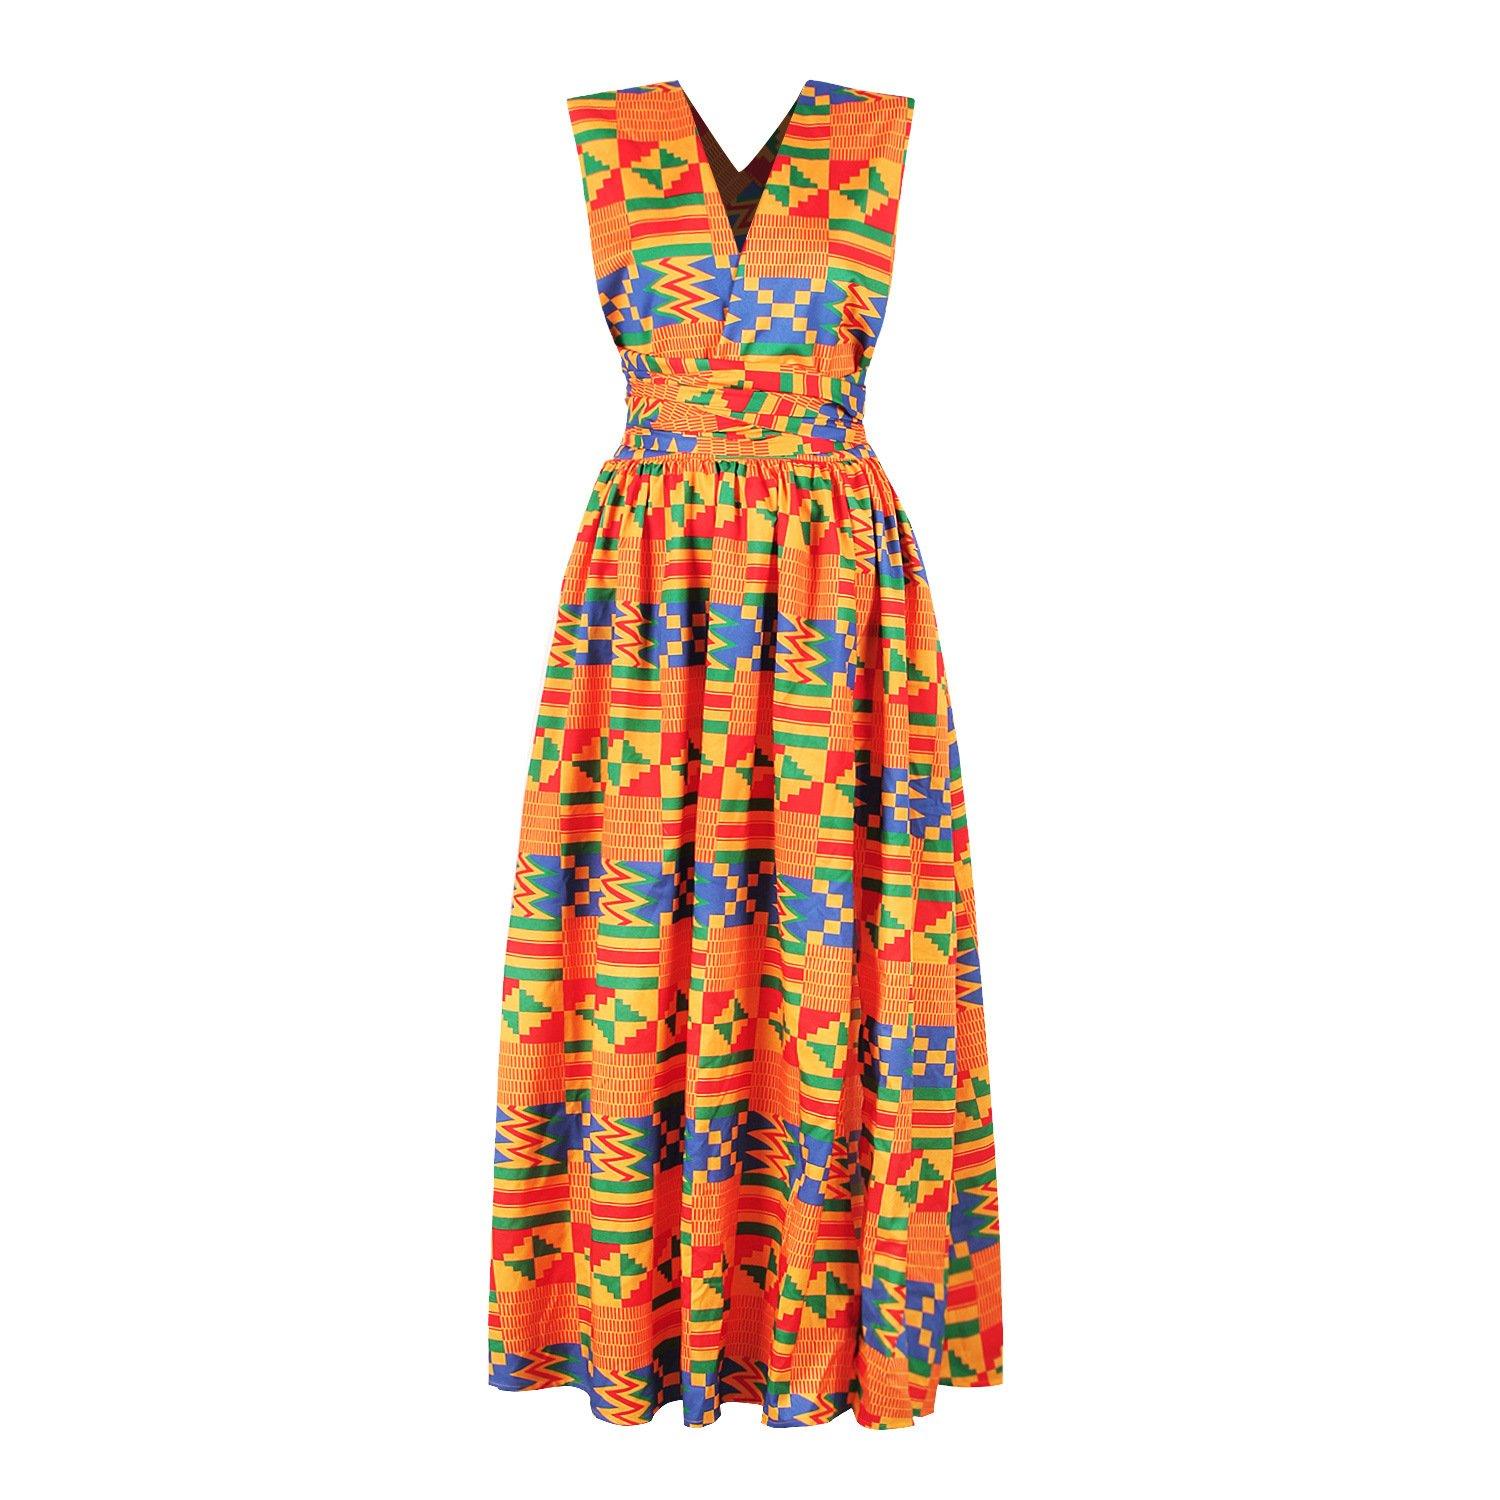 Ladies Fashion African Print Sleeveless Maxi - Beauty and Trends 